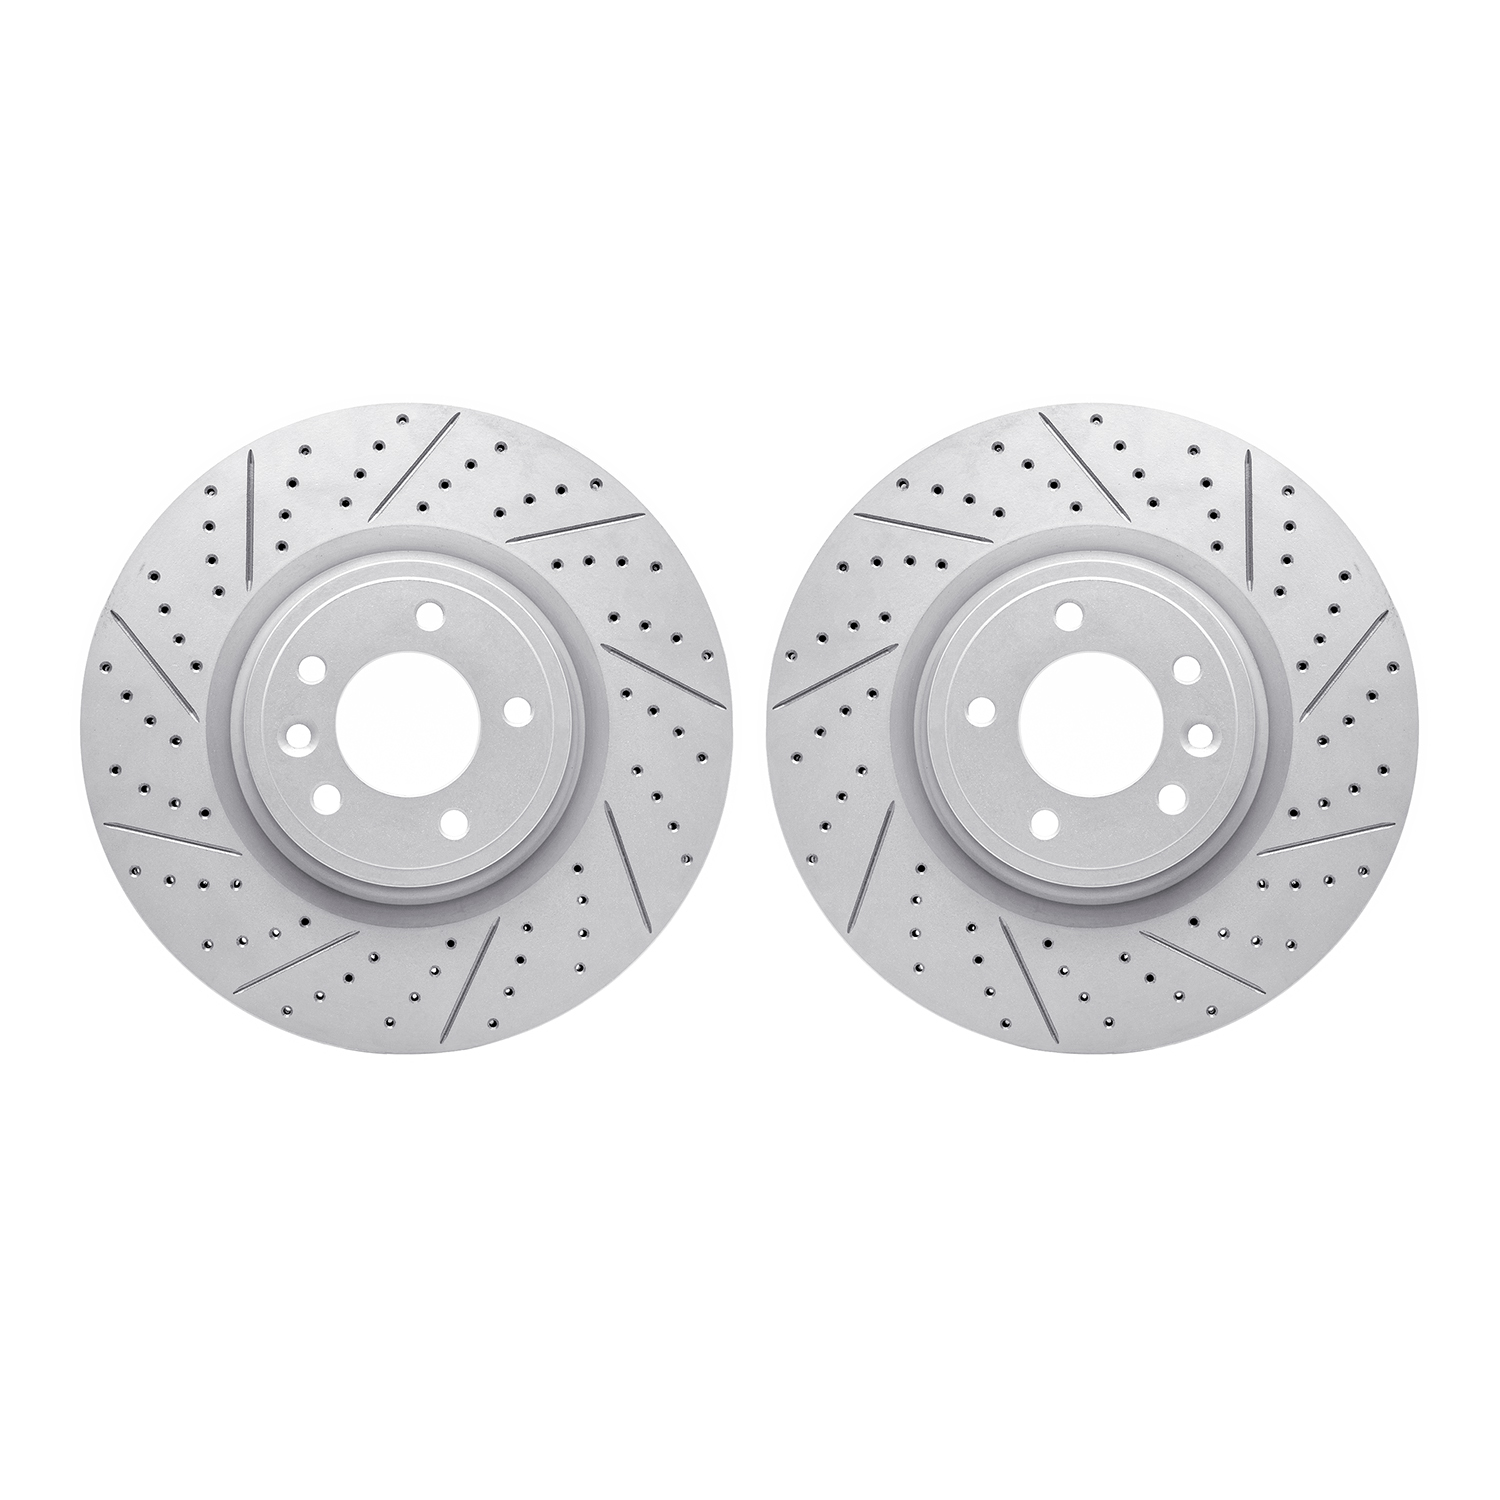 2002-11004 Geoperformance Drilled/Slotted Brake Rotors, 2018-2021 Land Rover, Position: Front